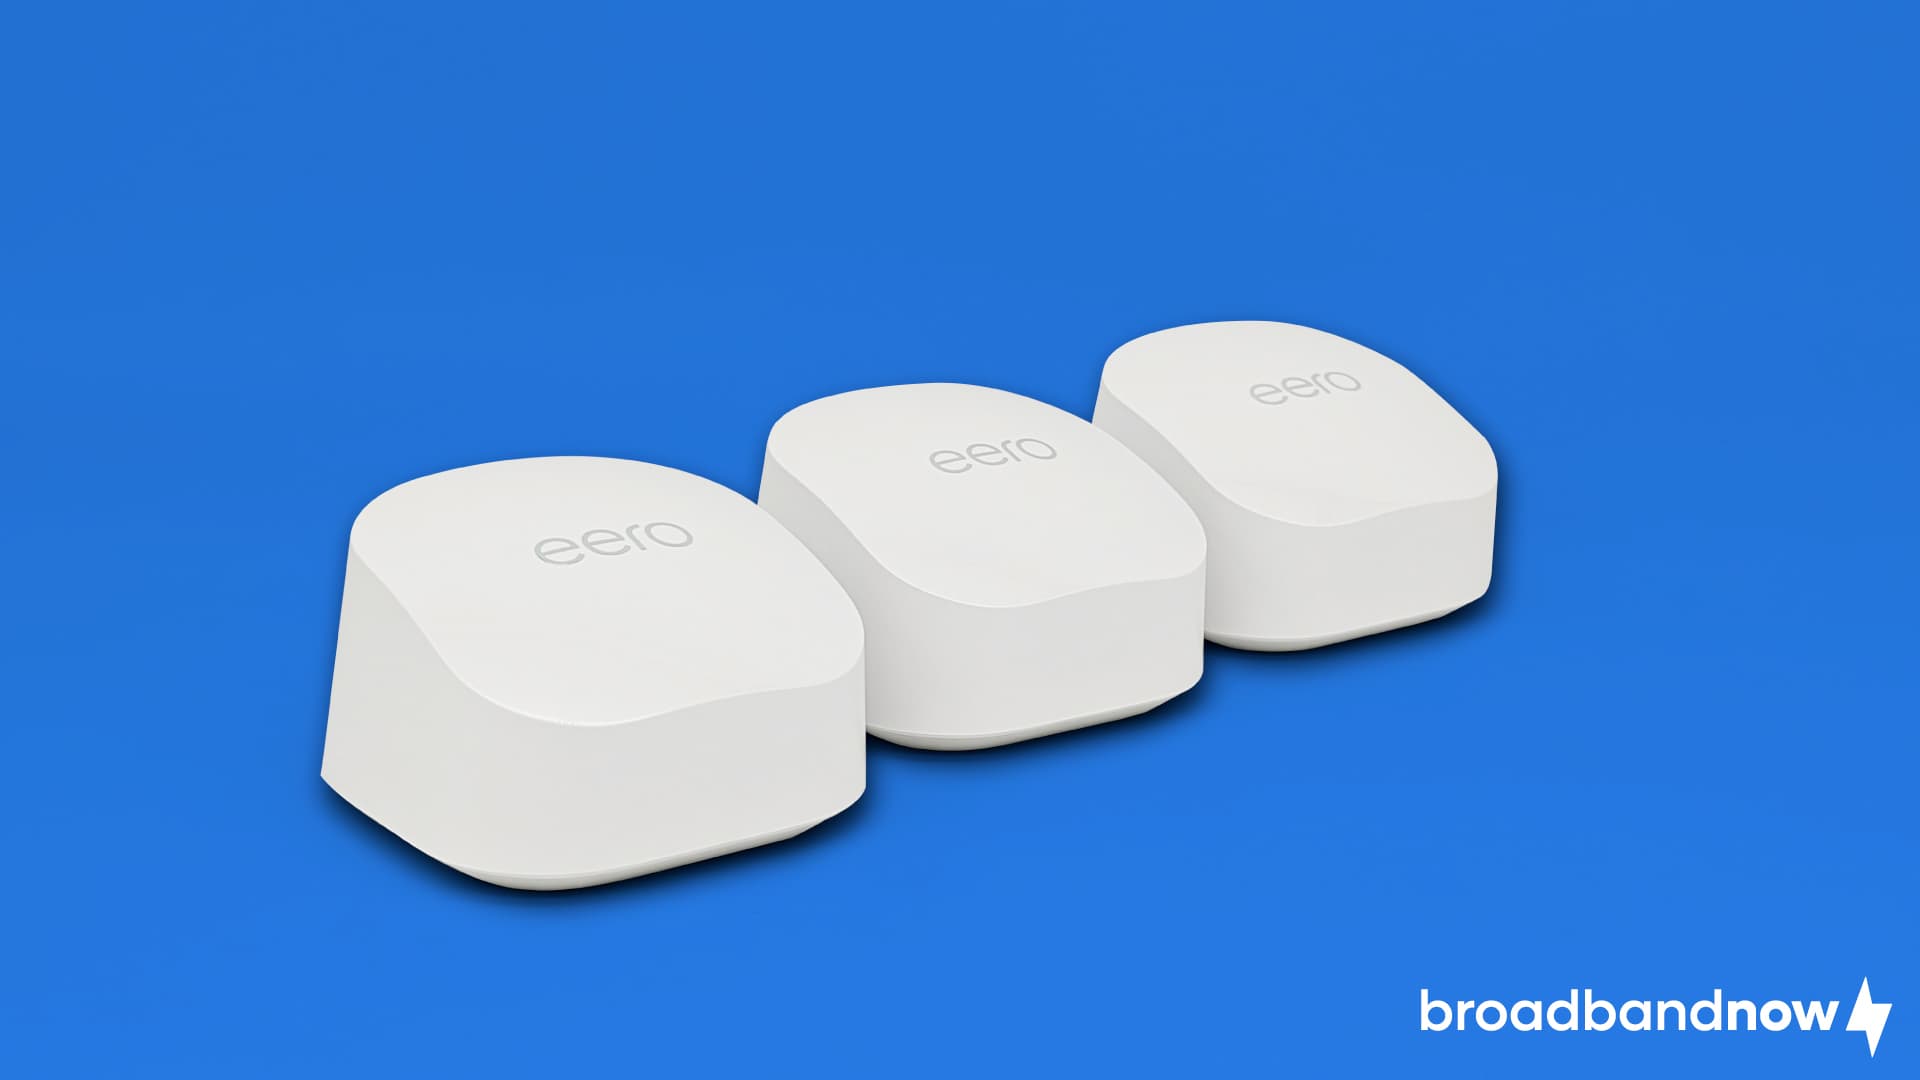 Three eero 6+ routers on a blue background